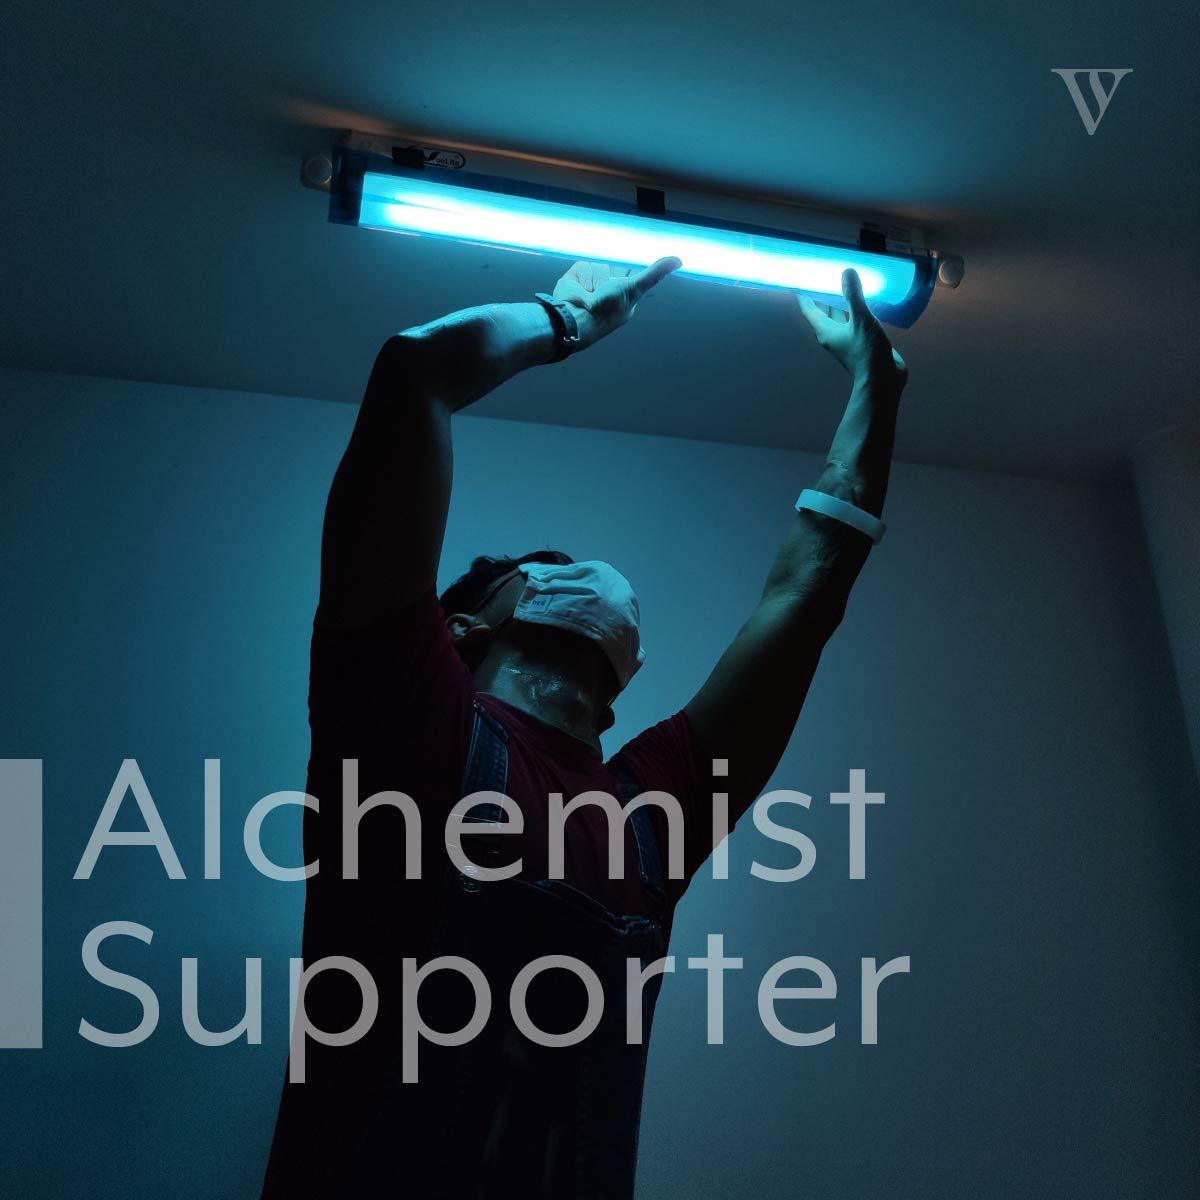 Be a “Alchemist” supporter